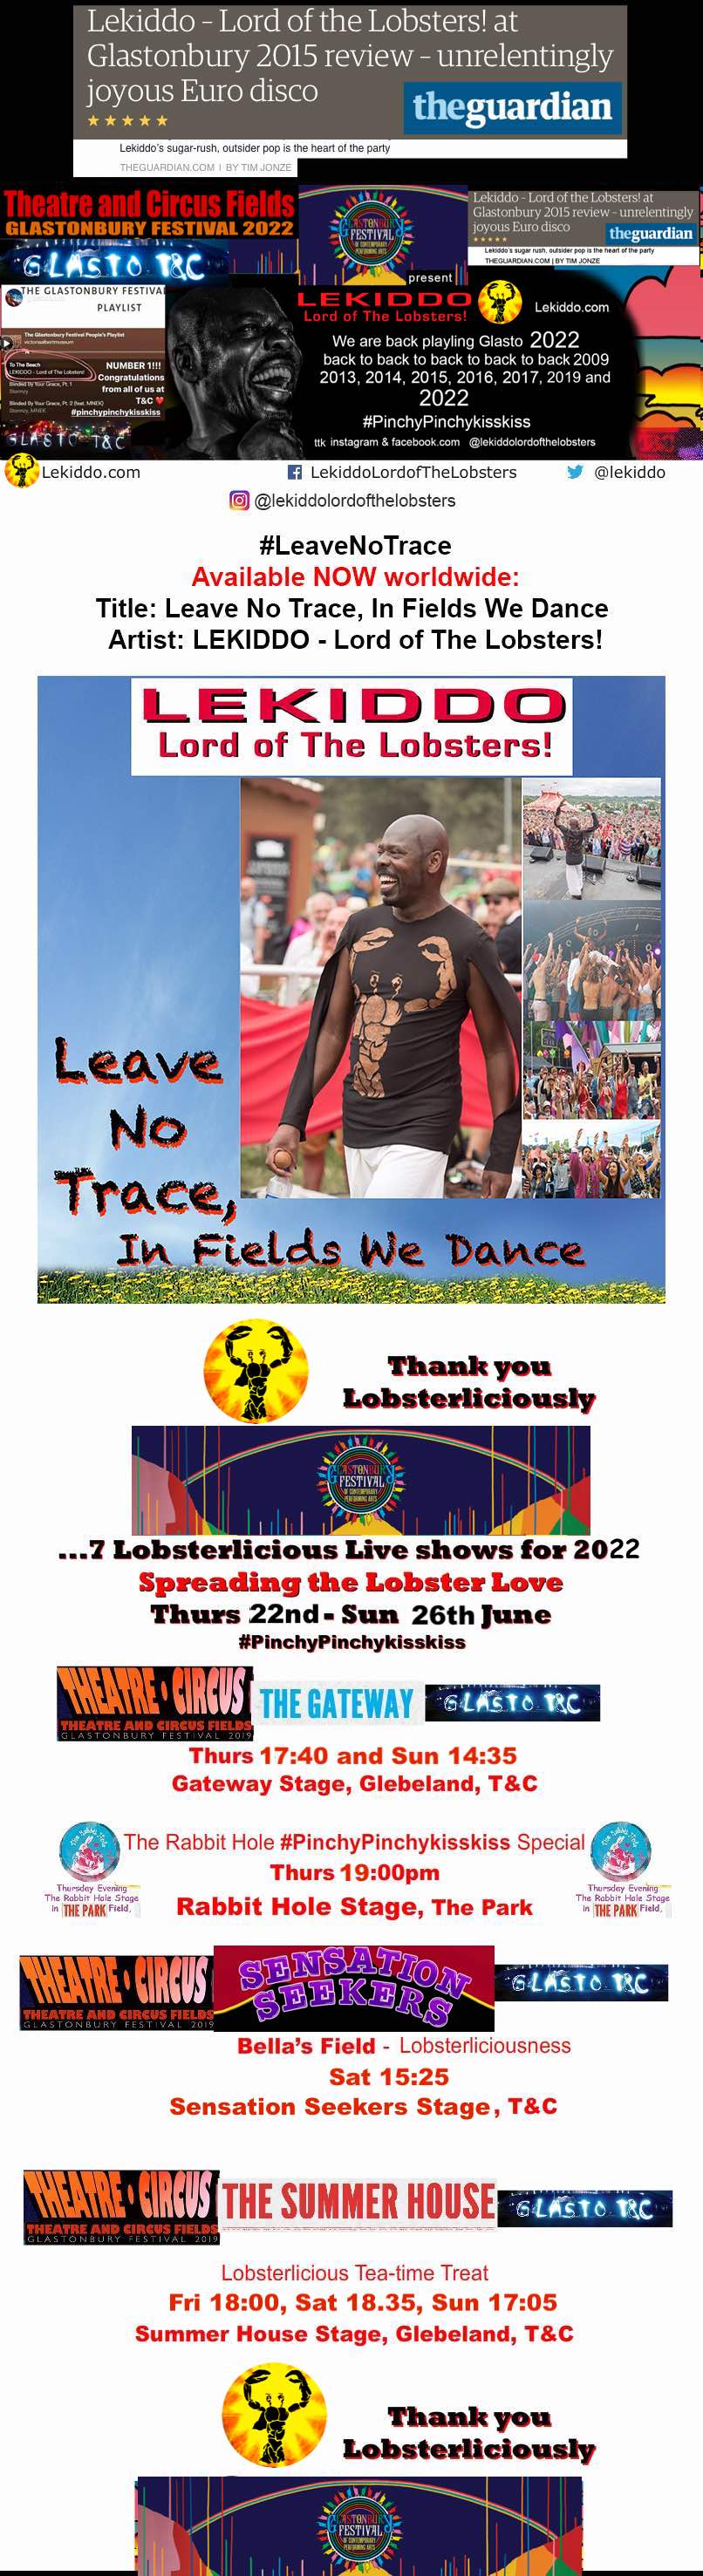 7 Glastonbury Festival 2022 Lobsterliciously live LEKIDDO - Lord of The Lobsters! shows